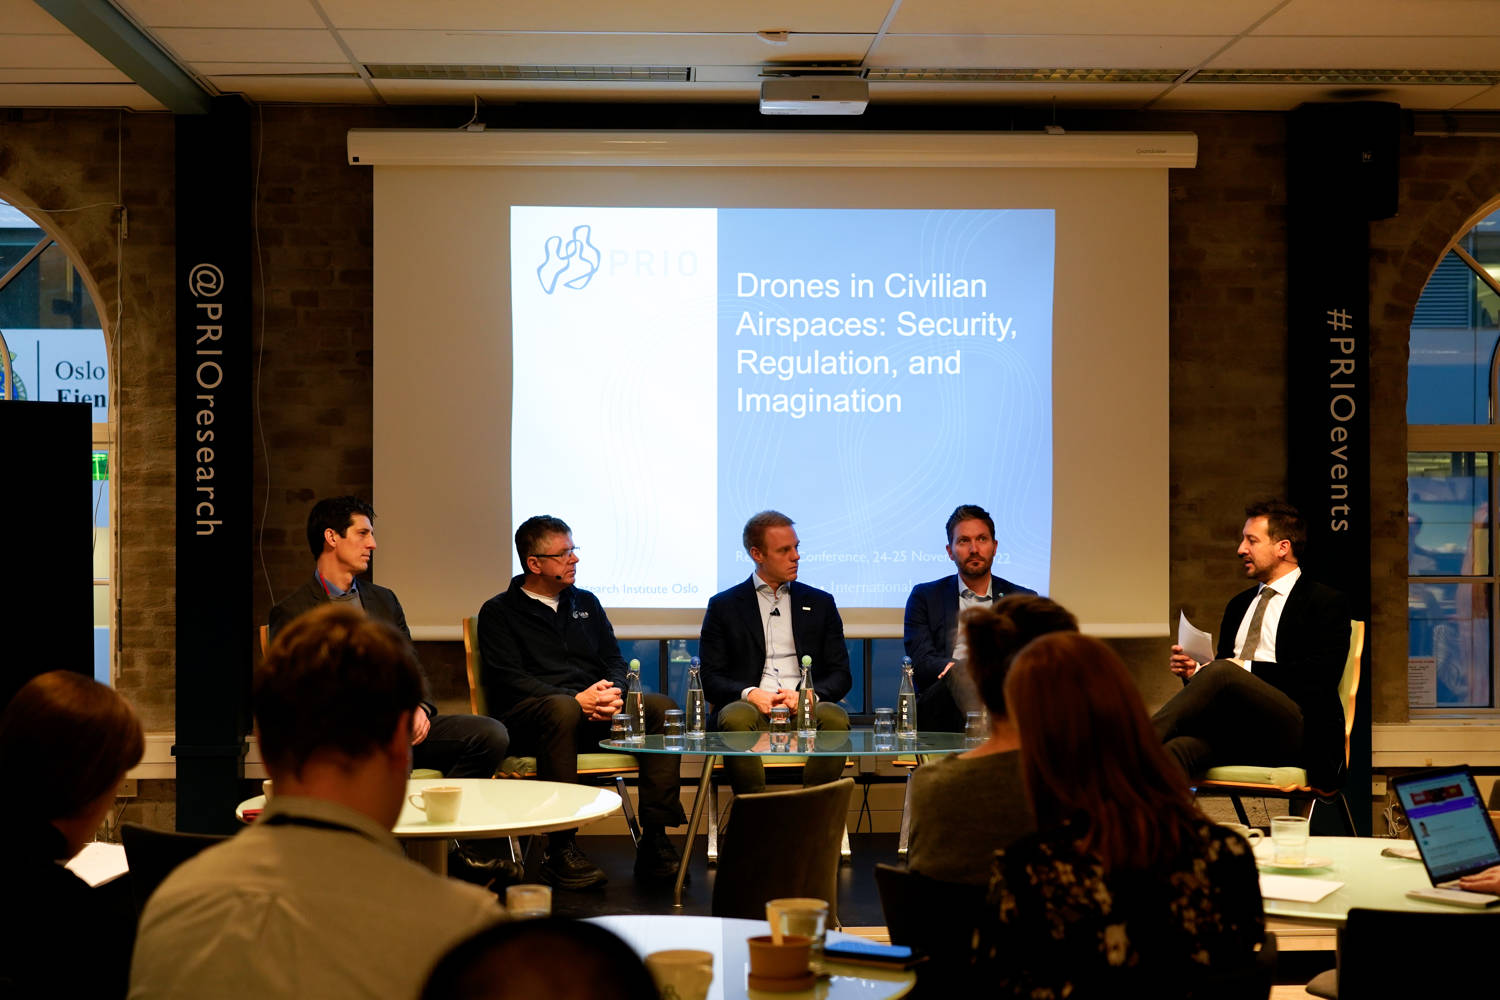 From left to right: Christian Brunsvig, Anders Martinsen, Mats Gjertsen, Jacob Bjelland, and Bruno Oliveira Martins. Photo: PRIO / Kristin Lowater